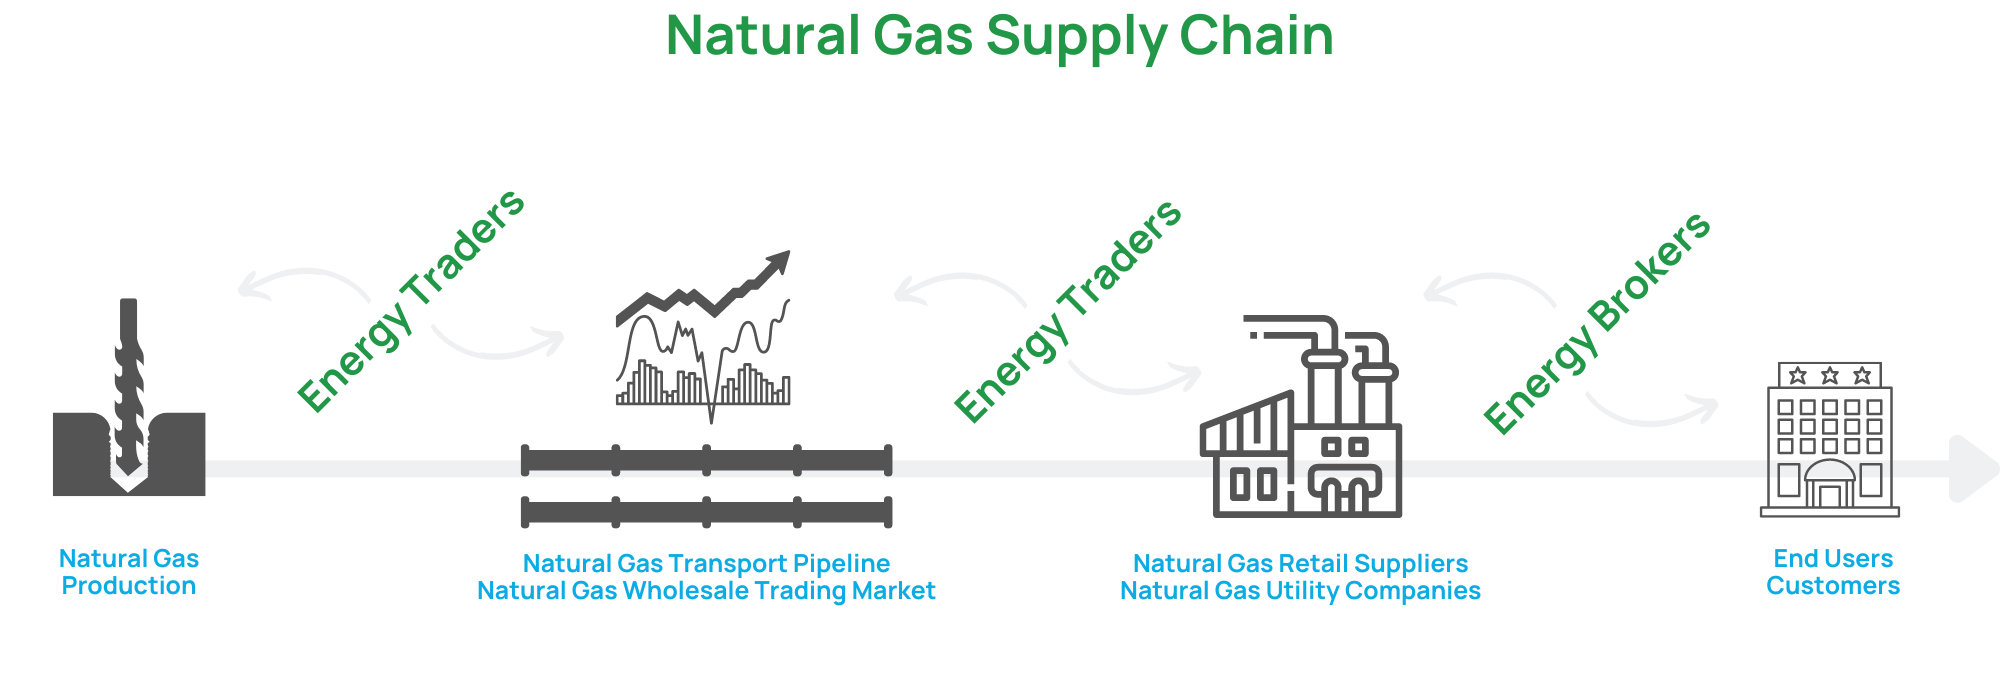 natural-gas-supply-chain